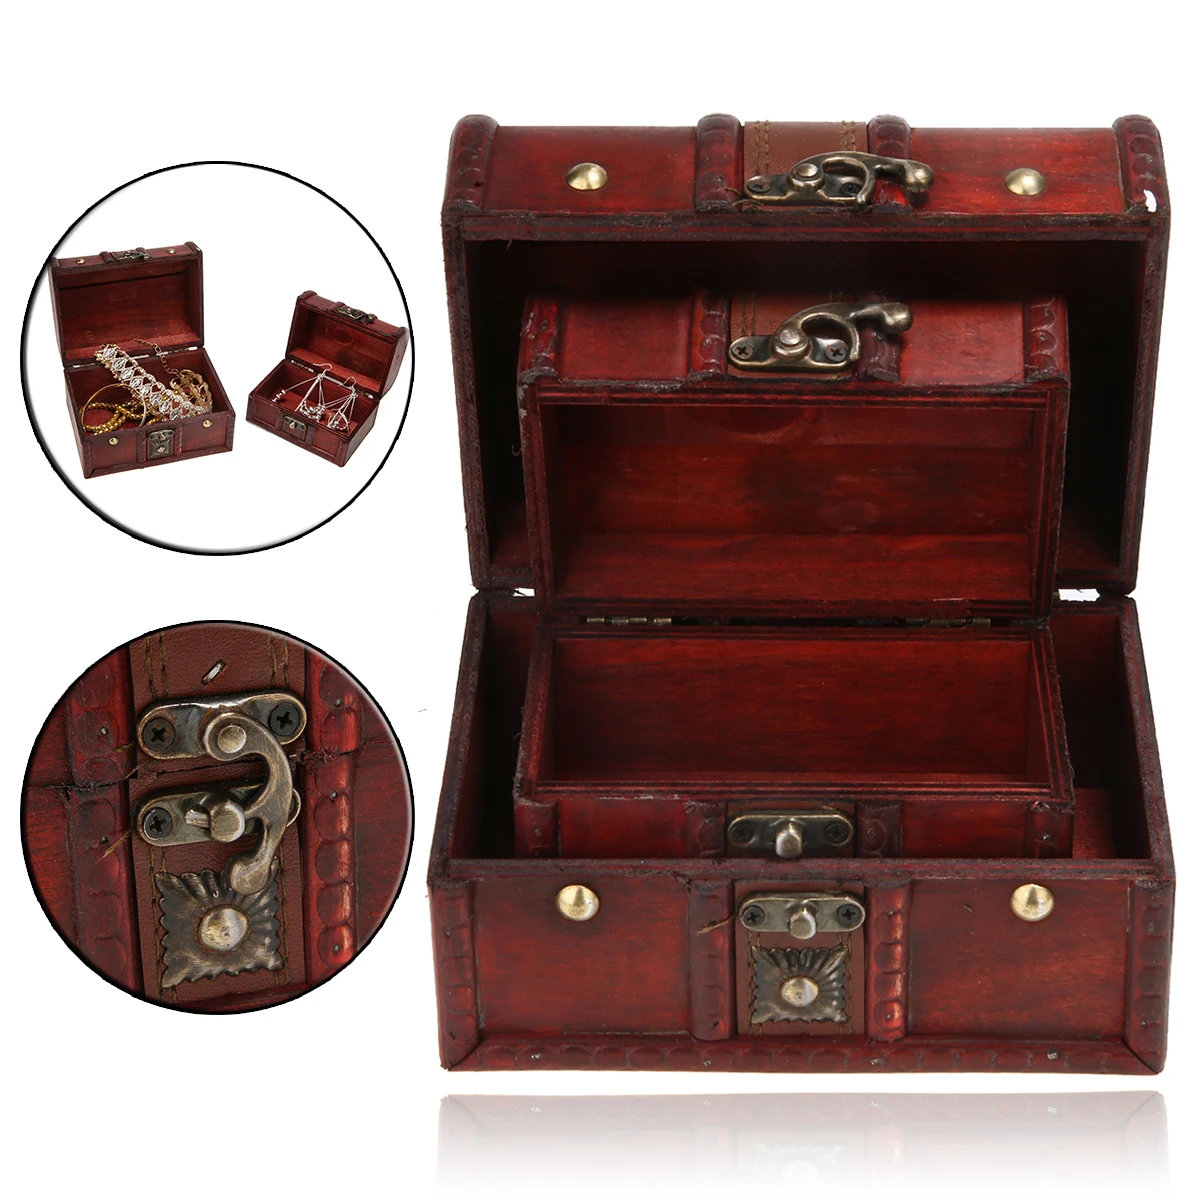 2Pcs Vintage Wooden Case Jewelry Storage Box Small Treasure Chest Wood Crate Home Boxes | Дом и сад